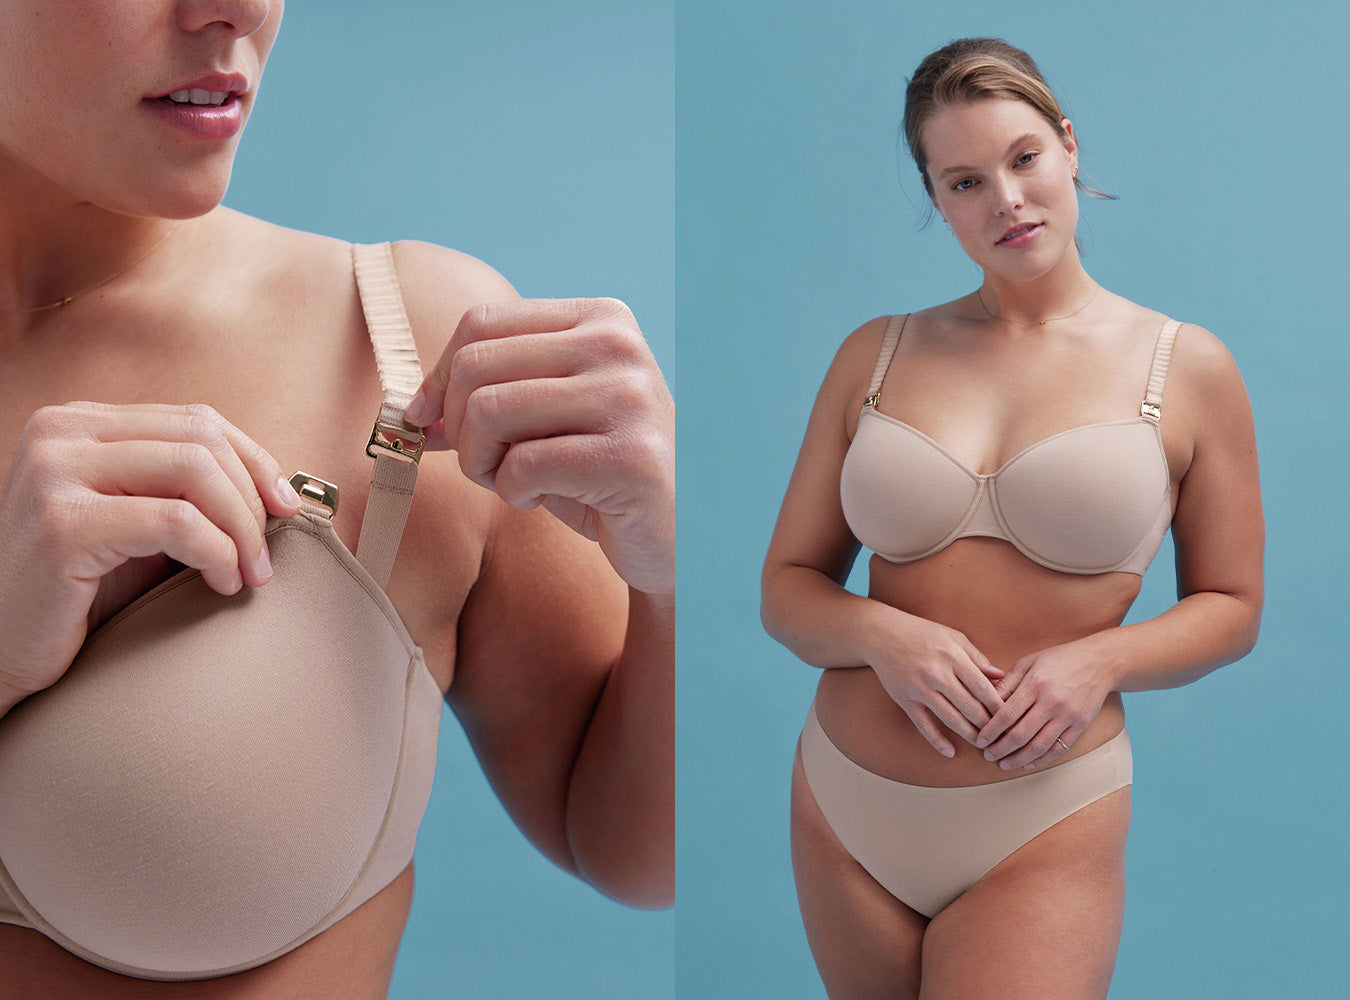 BARE NECESSITIES on X: Nursing bras may be the toughest kind to buy. They  have to fit & support right at a time when your bra size is a moving target.  The